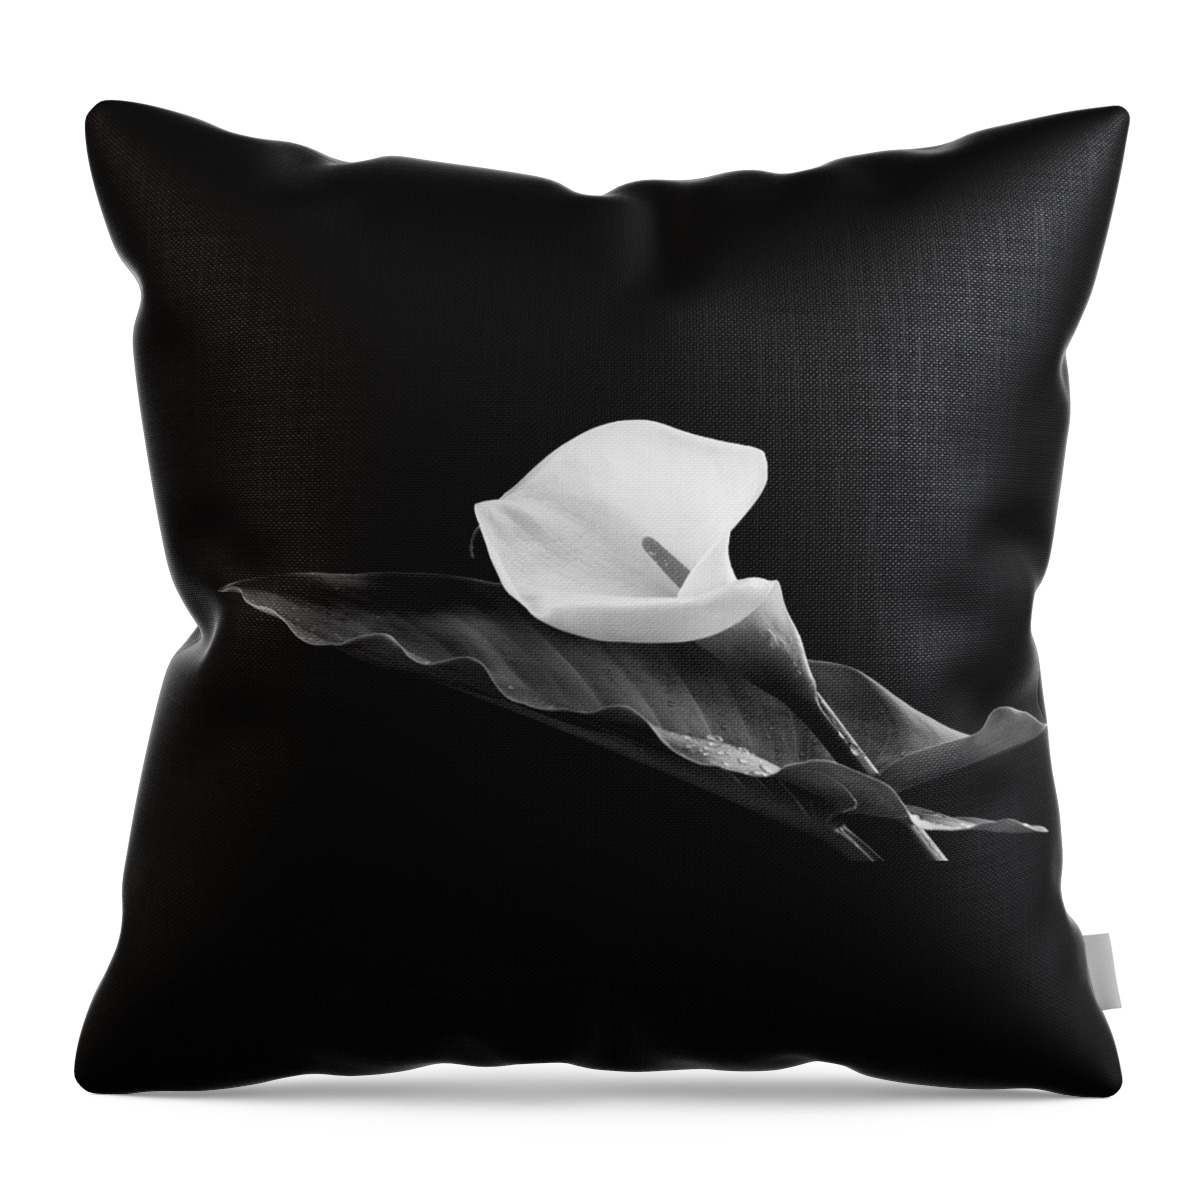 Calla Lili Throw Pillow featuring the photograph Calla lily flower by Michalakis Ppalis